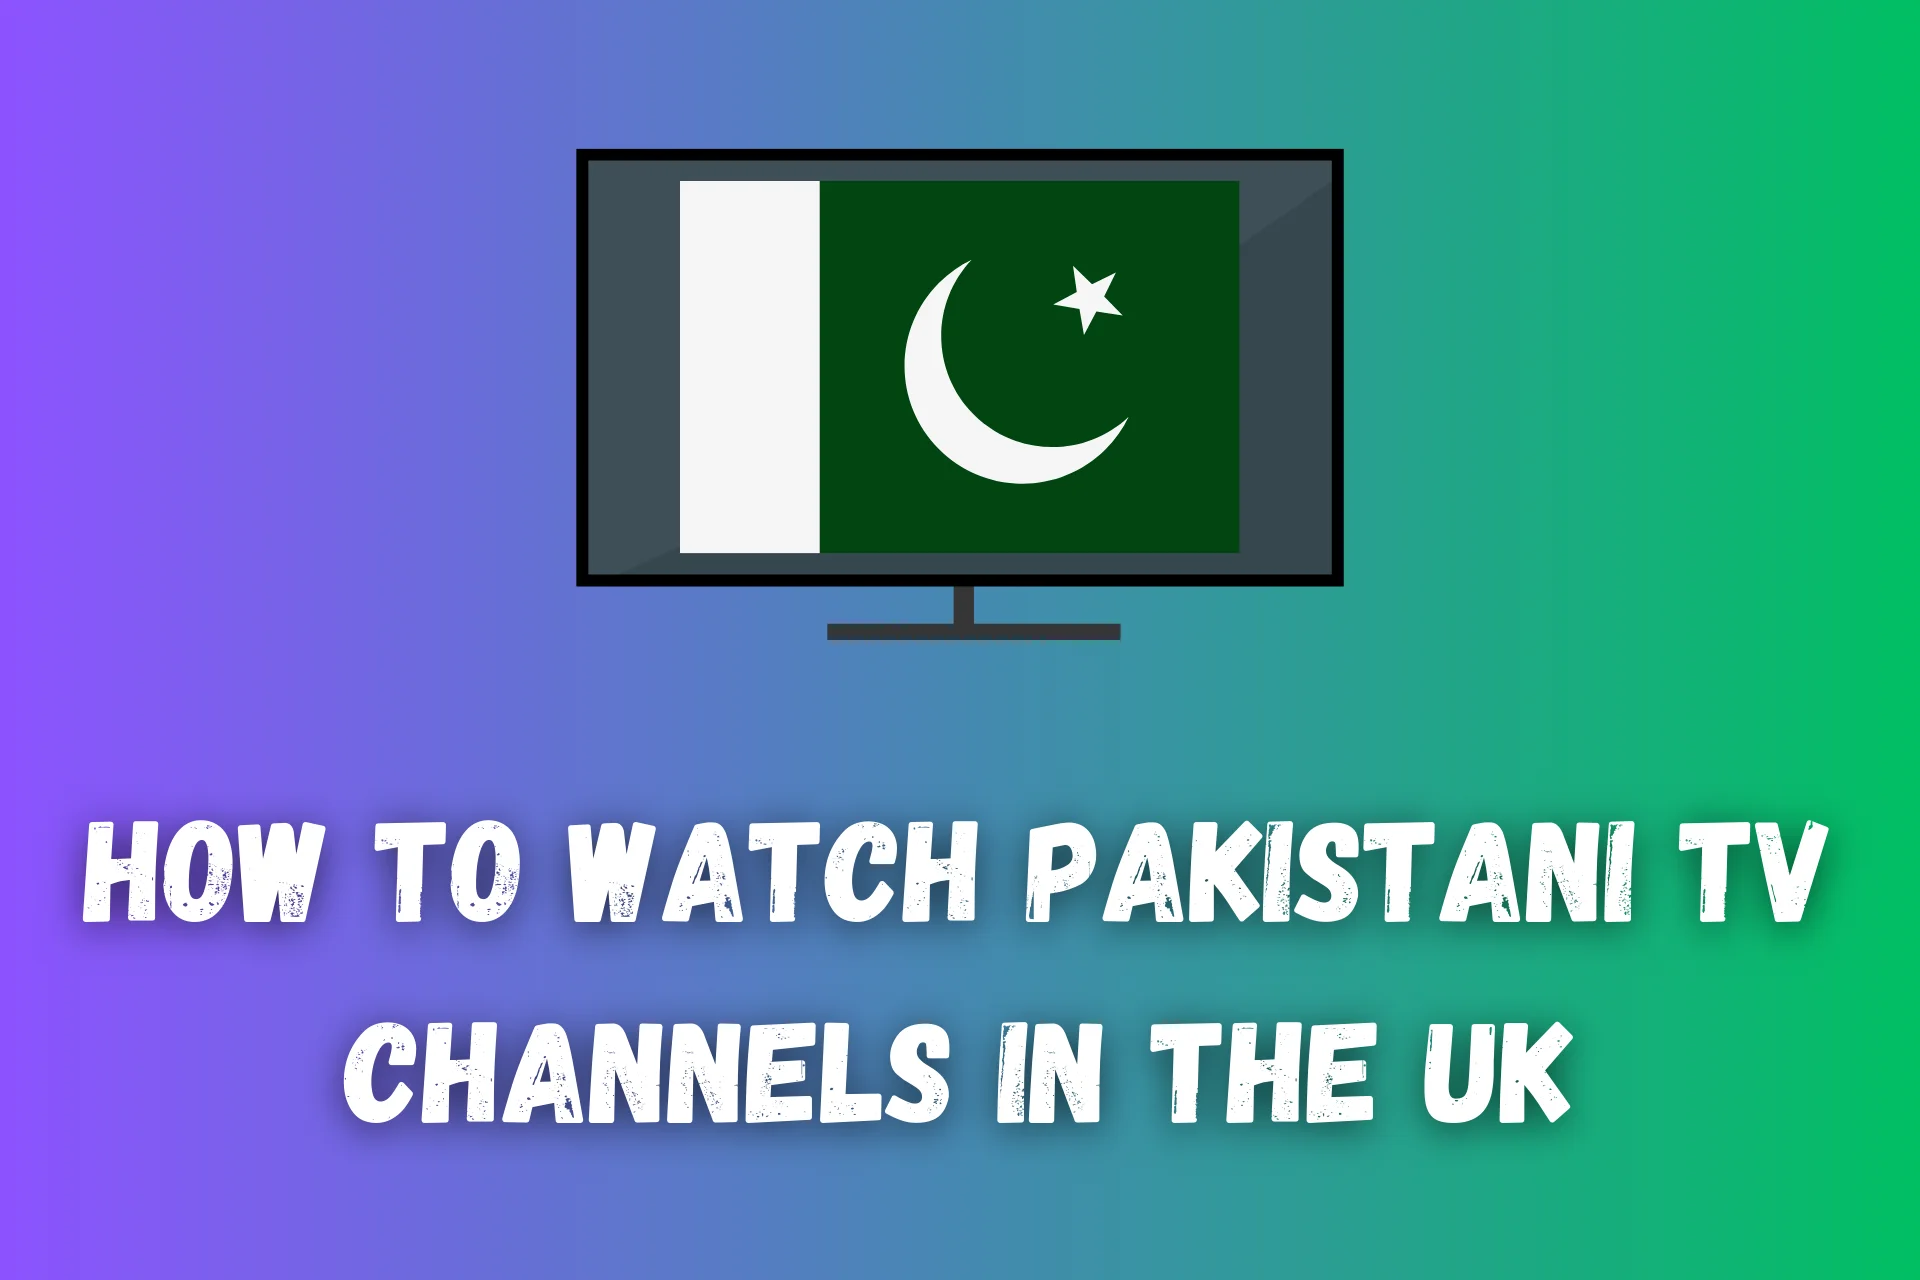 How to watch Pakistani TV channels in UK